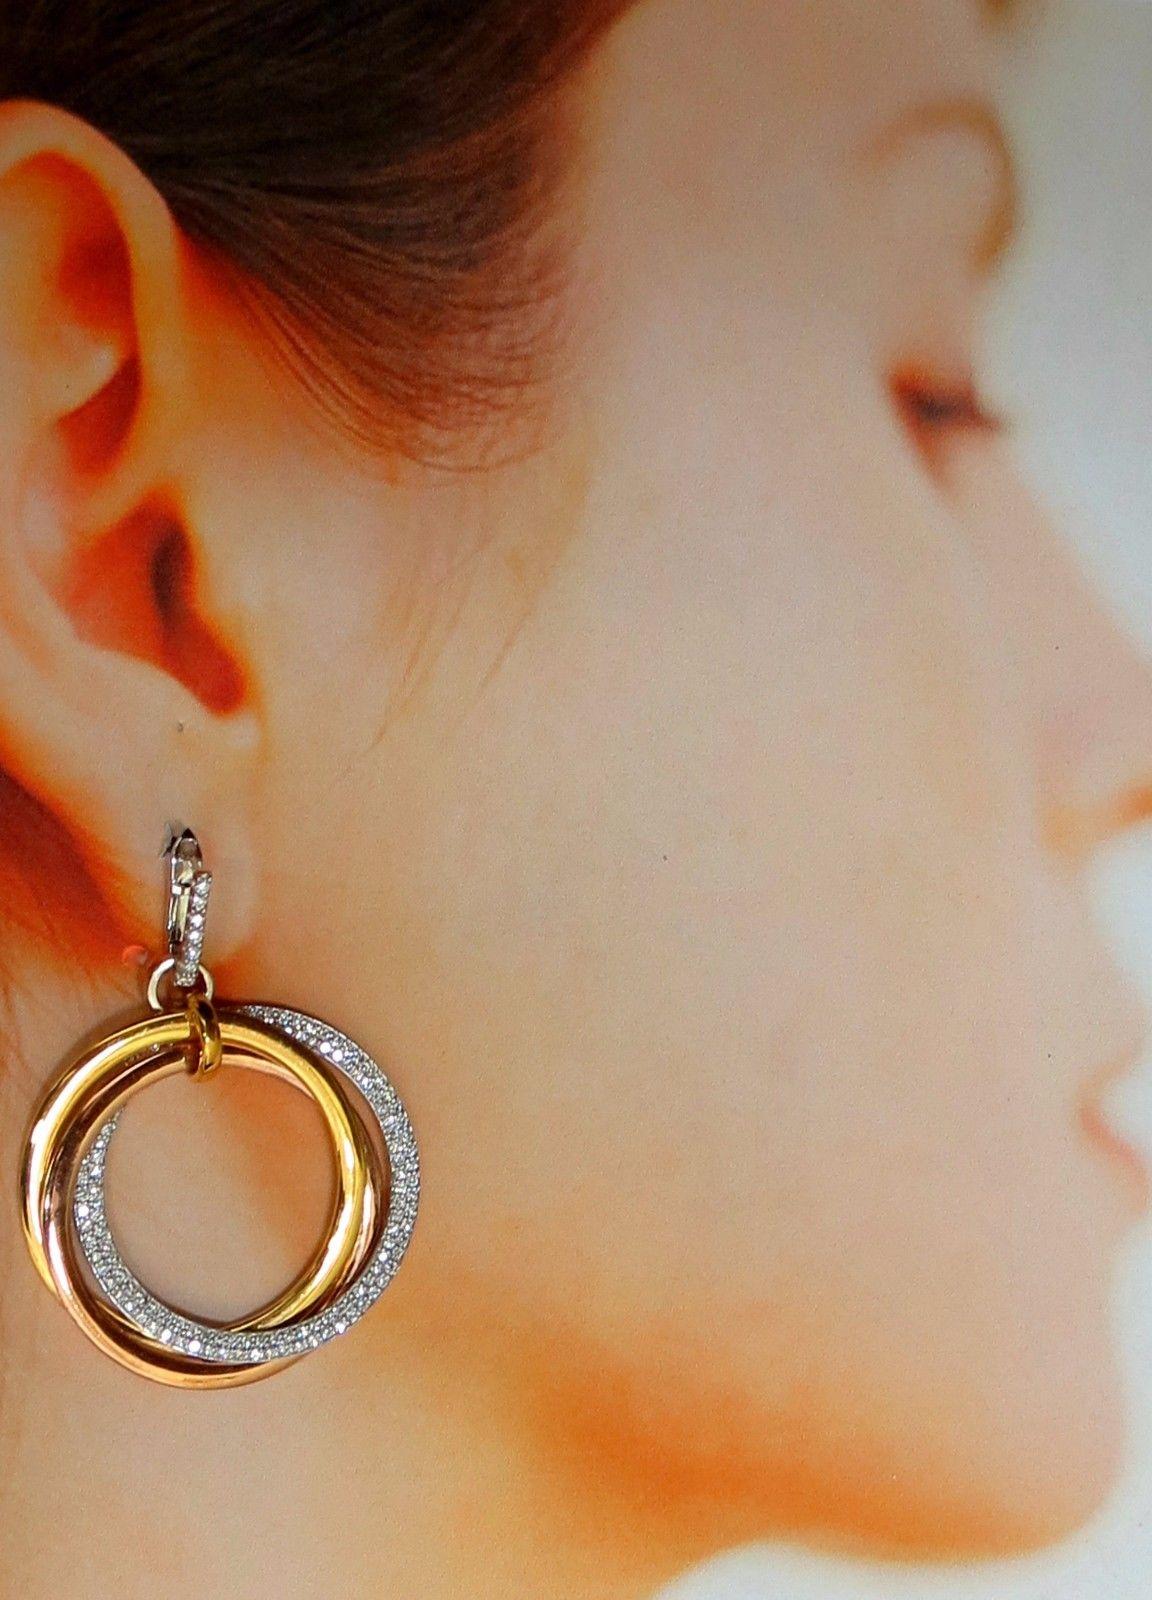 Large Rolling Rings circle loop earrings.

The Modern Dangle.

3.80cts of natural round diamonds: 

G-color, Vs-2 clarity.

14kt. white / yellow / rose gold

26.9 grams.

Earrings measure: 1.96 inch long 

1.3 inch diameter on each ring

Comfortable